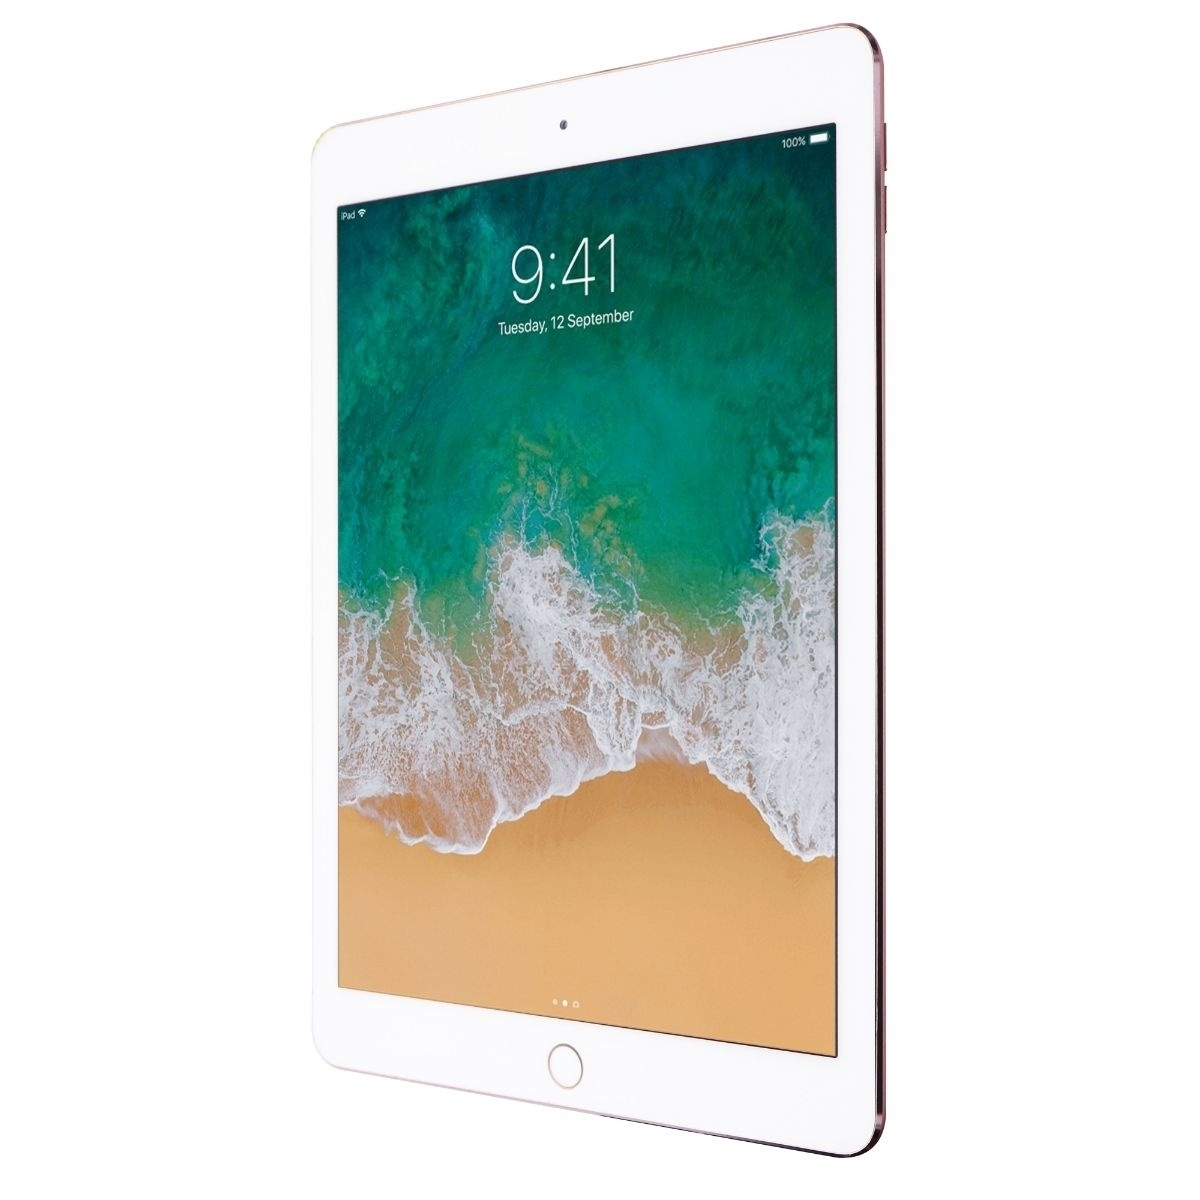 Apple IPad Pro MM172LL/A 9.7 Inch (WiFi Only) Tablet - 32GB - Rose Gold A1673 (Refurbished)